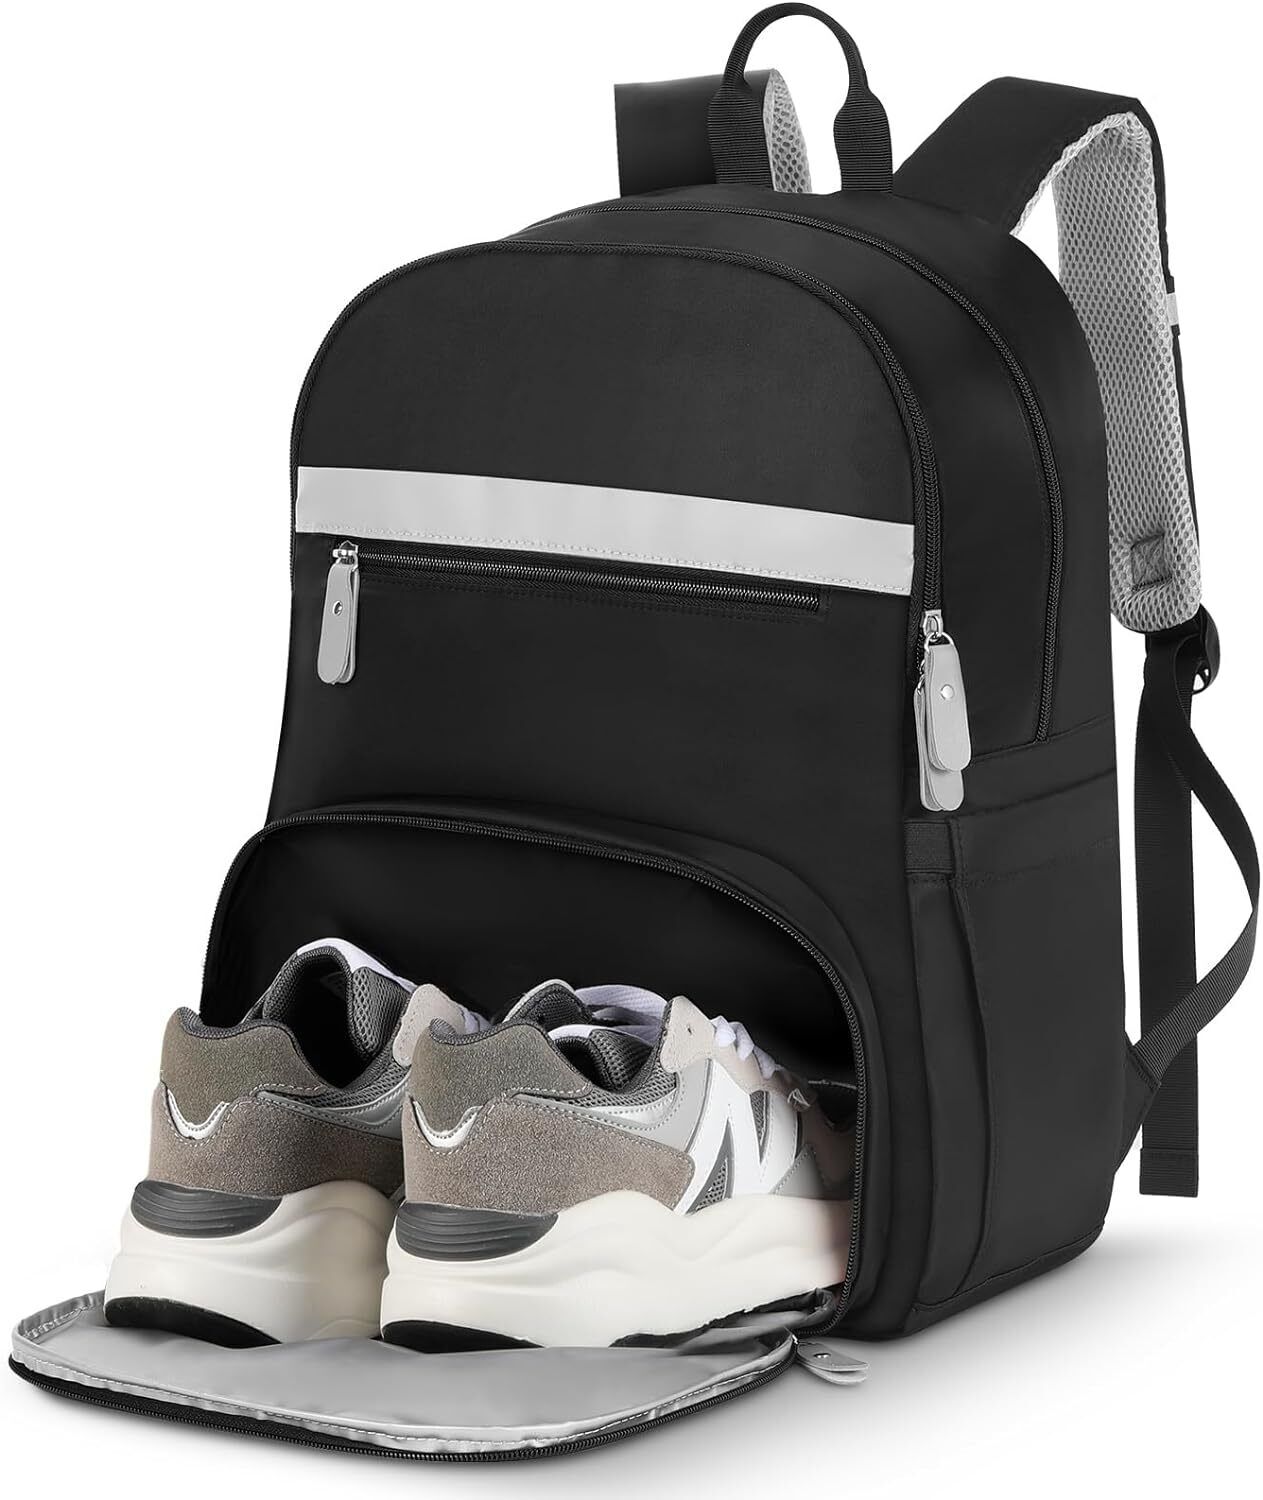 MoKo Womens Gym Backpack, Large Travel Backpack with Shoe Compartment Black 